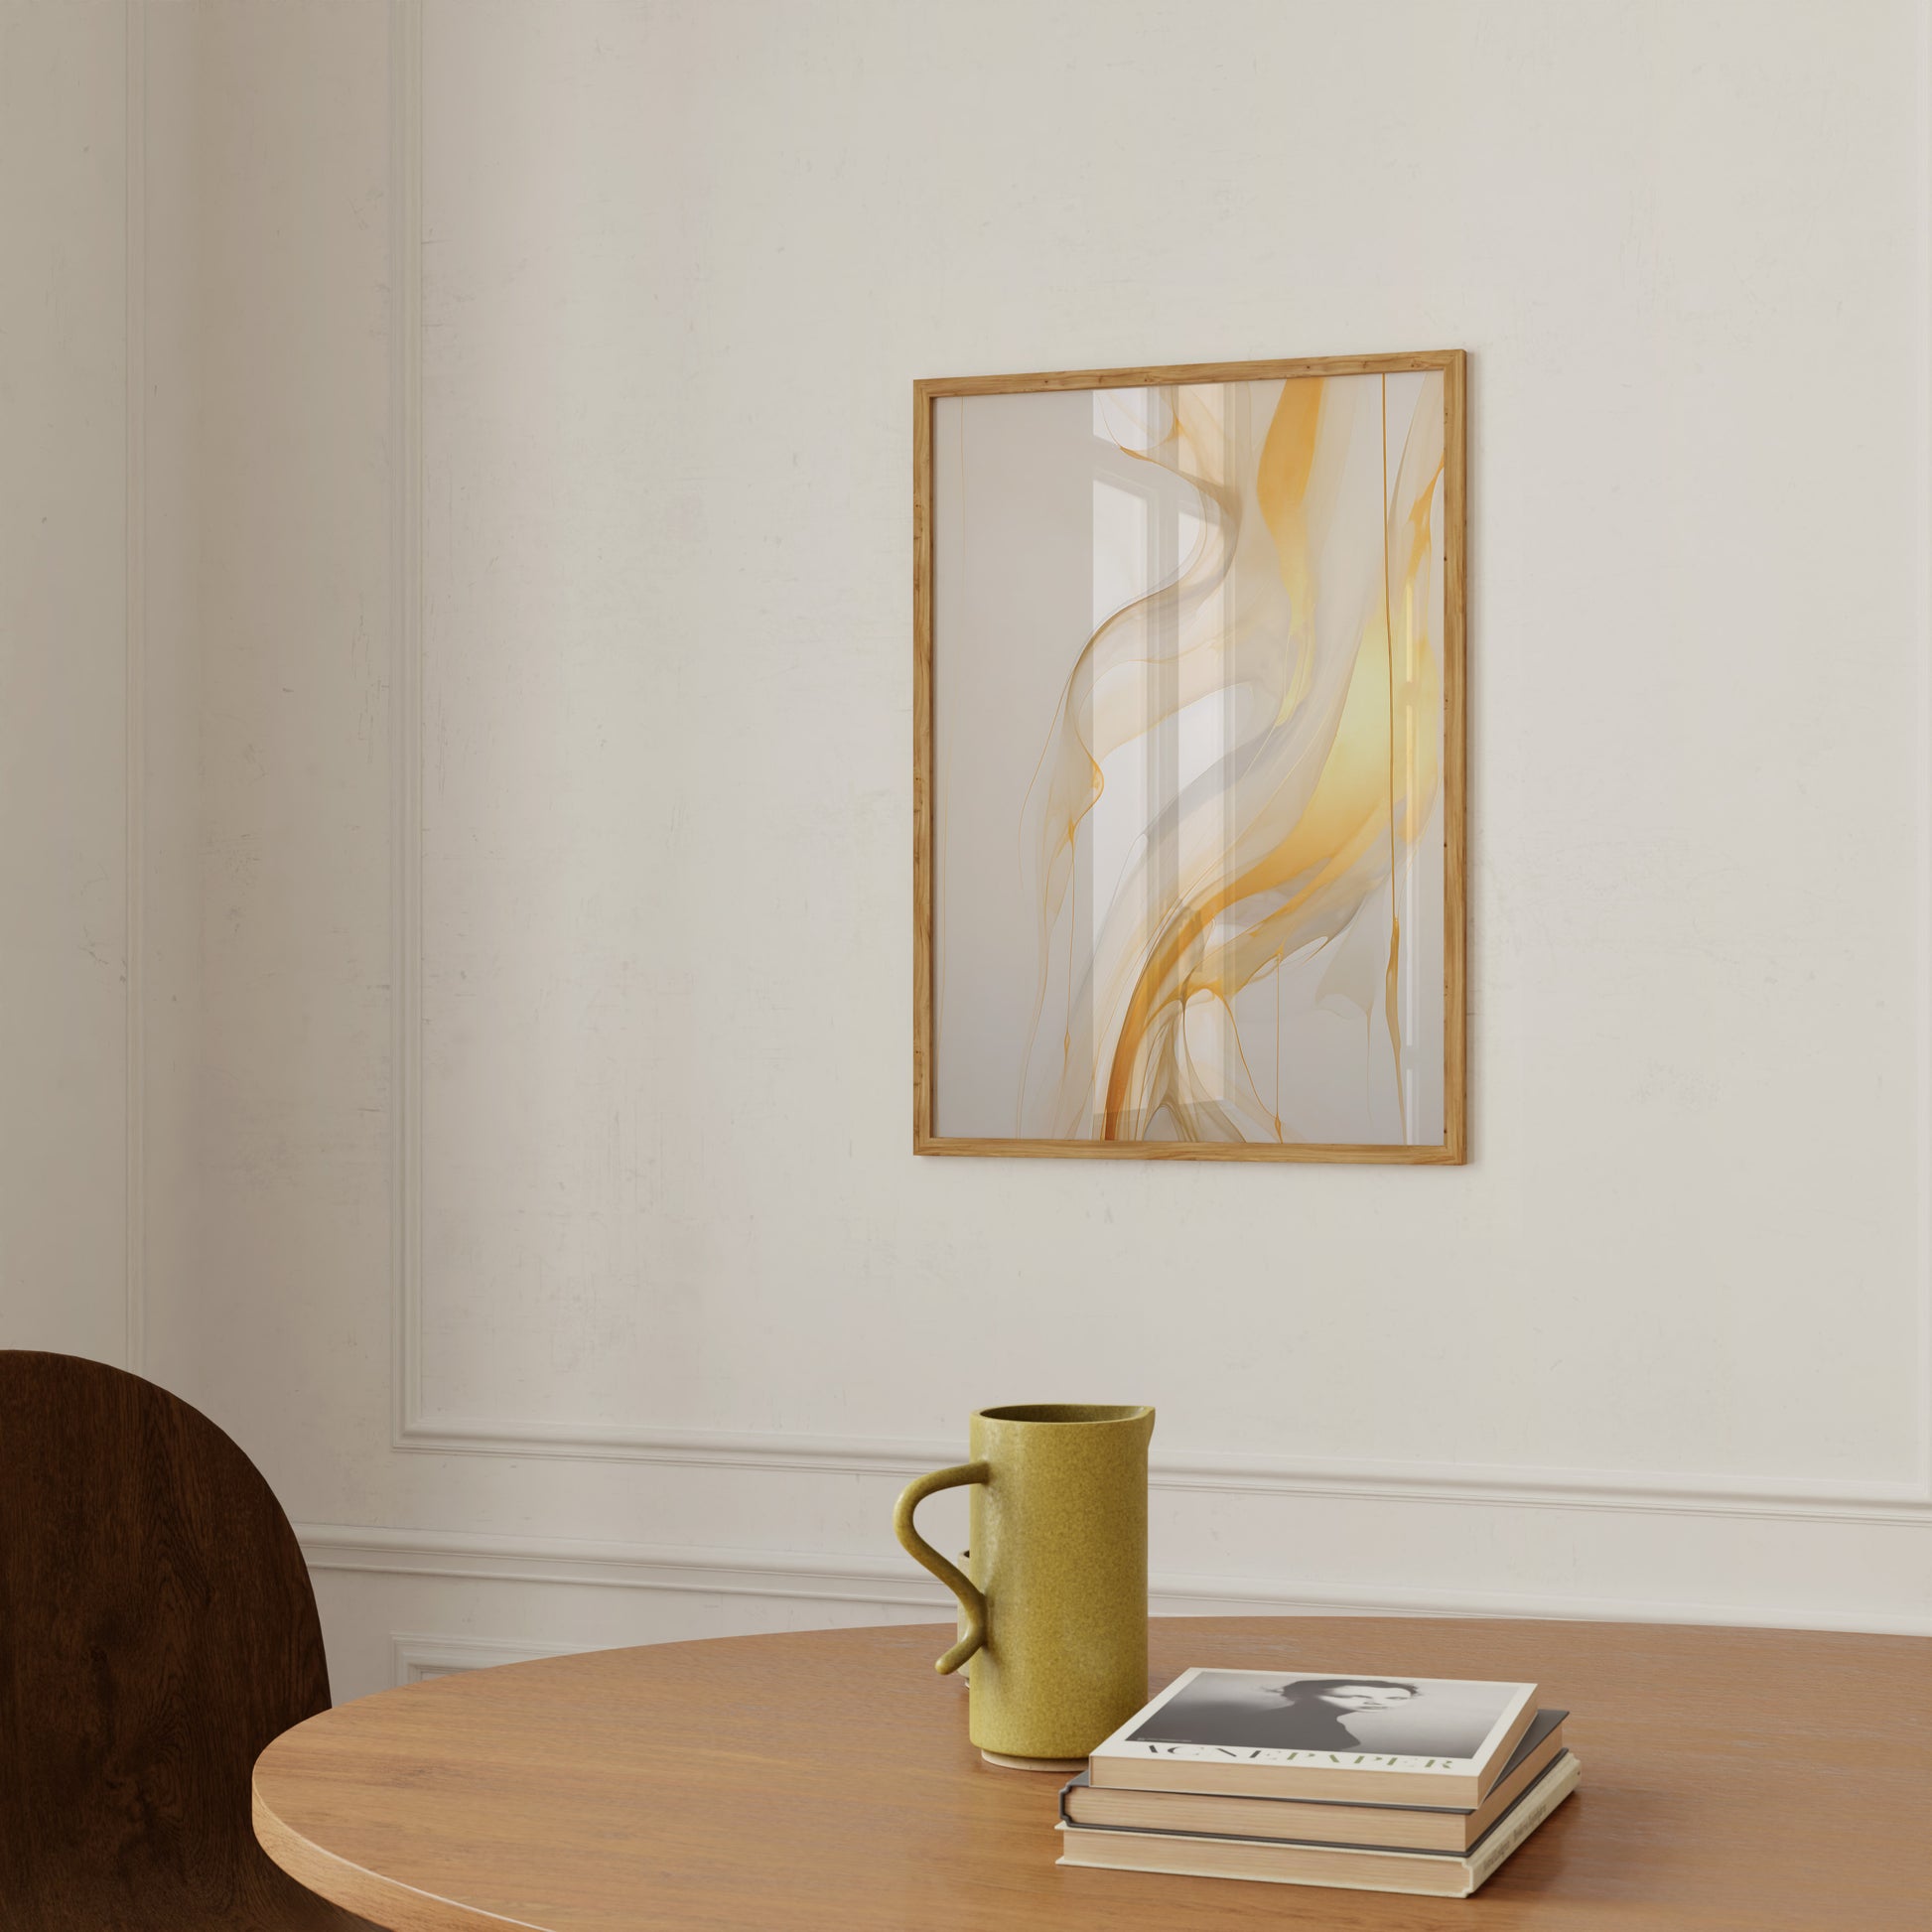 Abstract art in frame on a wall above a table with a mug and books.